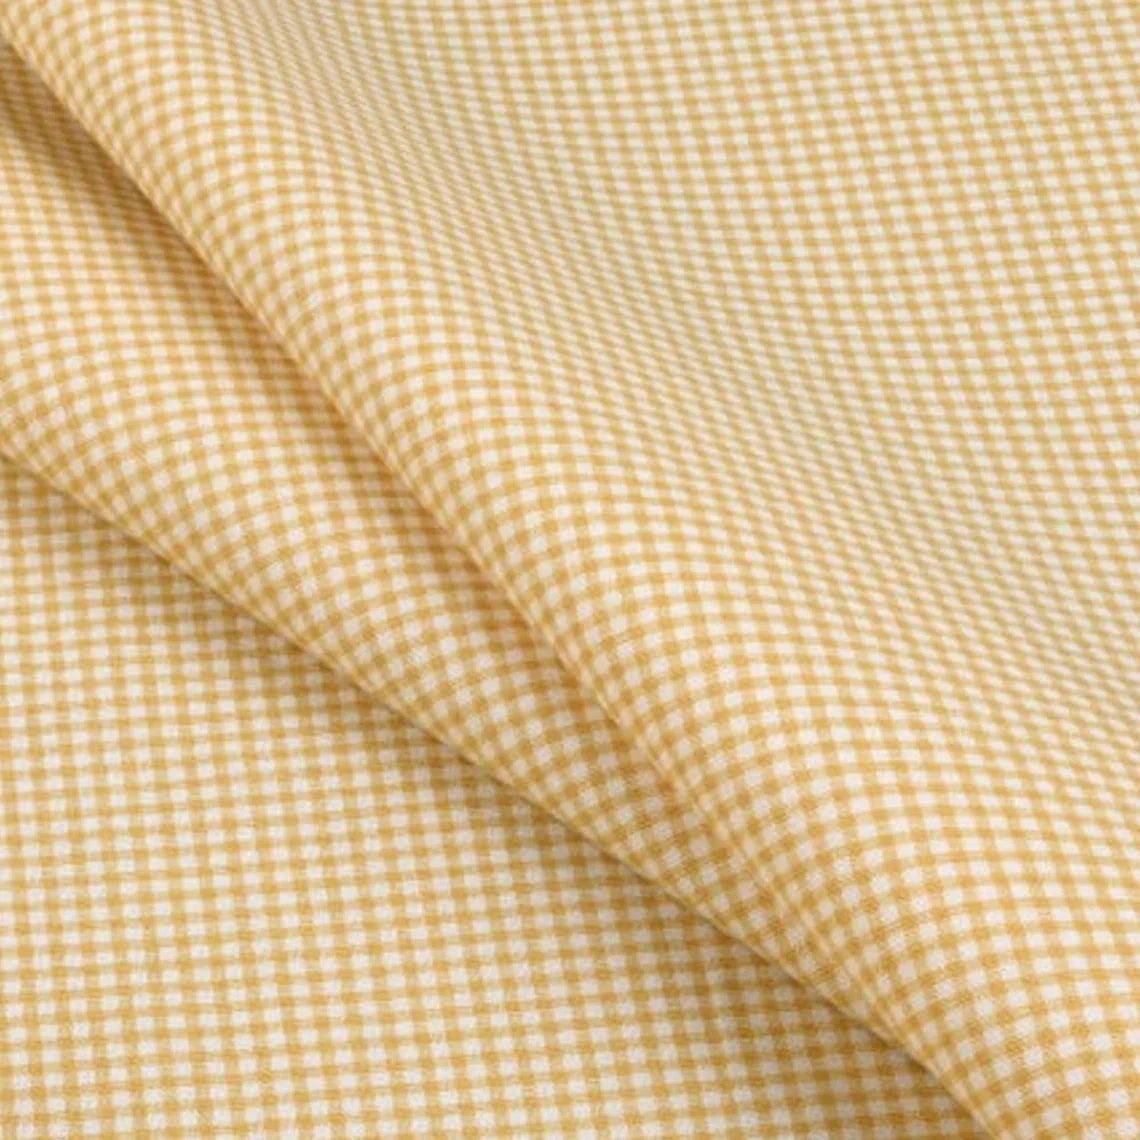 Tailored Tier Cafe Curtain Panels Pair in Farmhouse Barley Yellow Gold Gingham Check